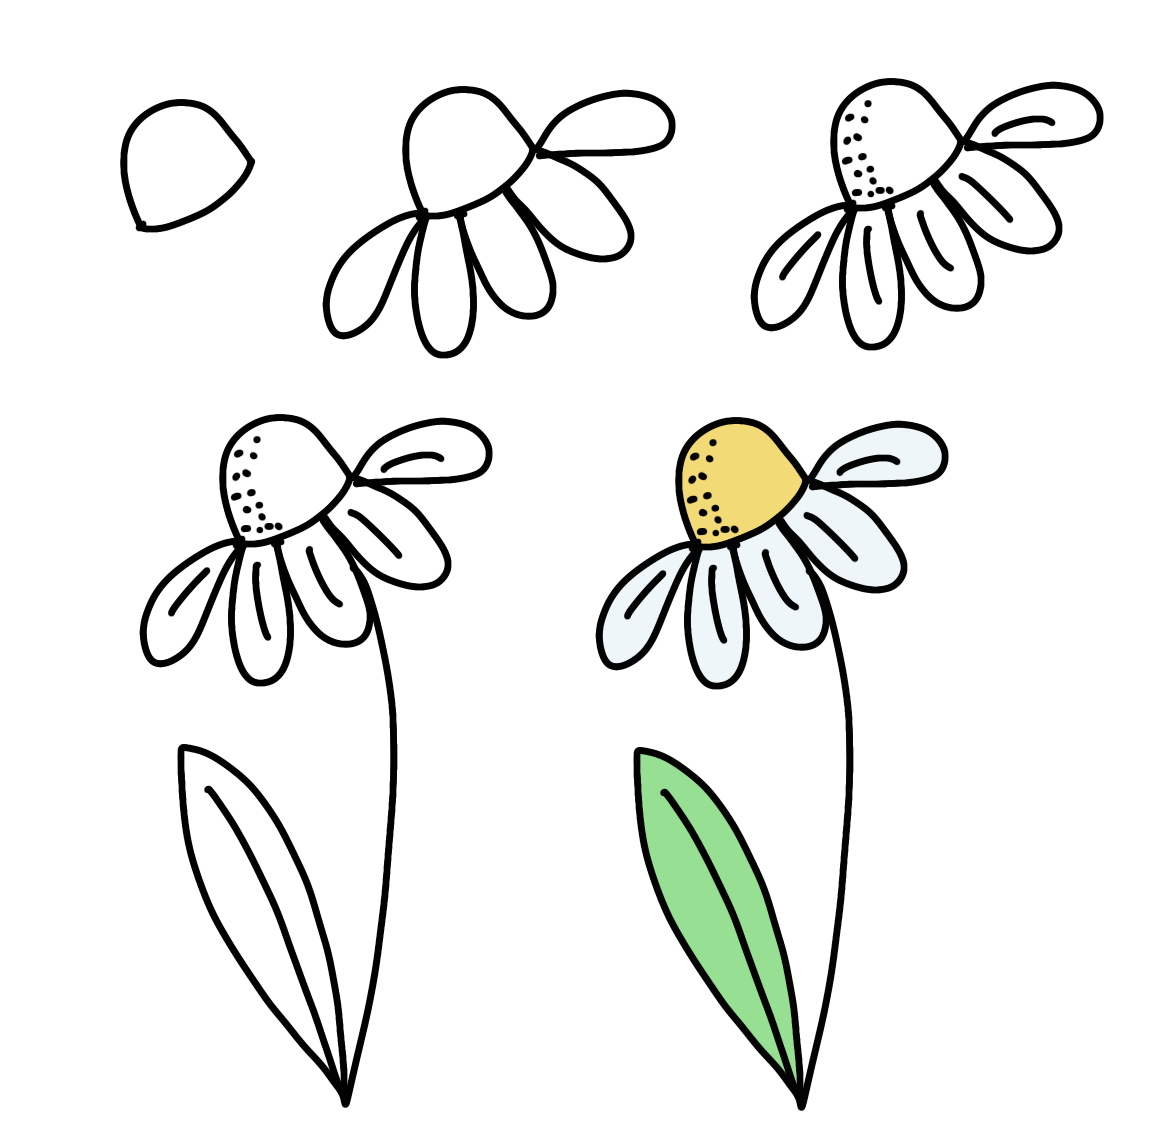 Image contains five step by step sketches for how to draw a daisy, as described in the post.